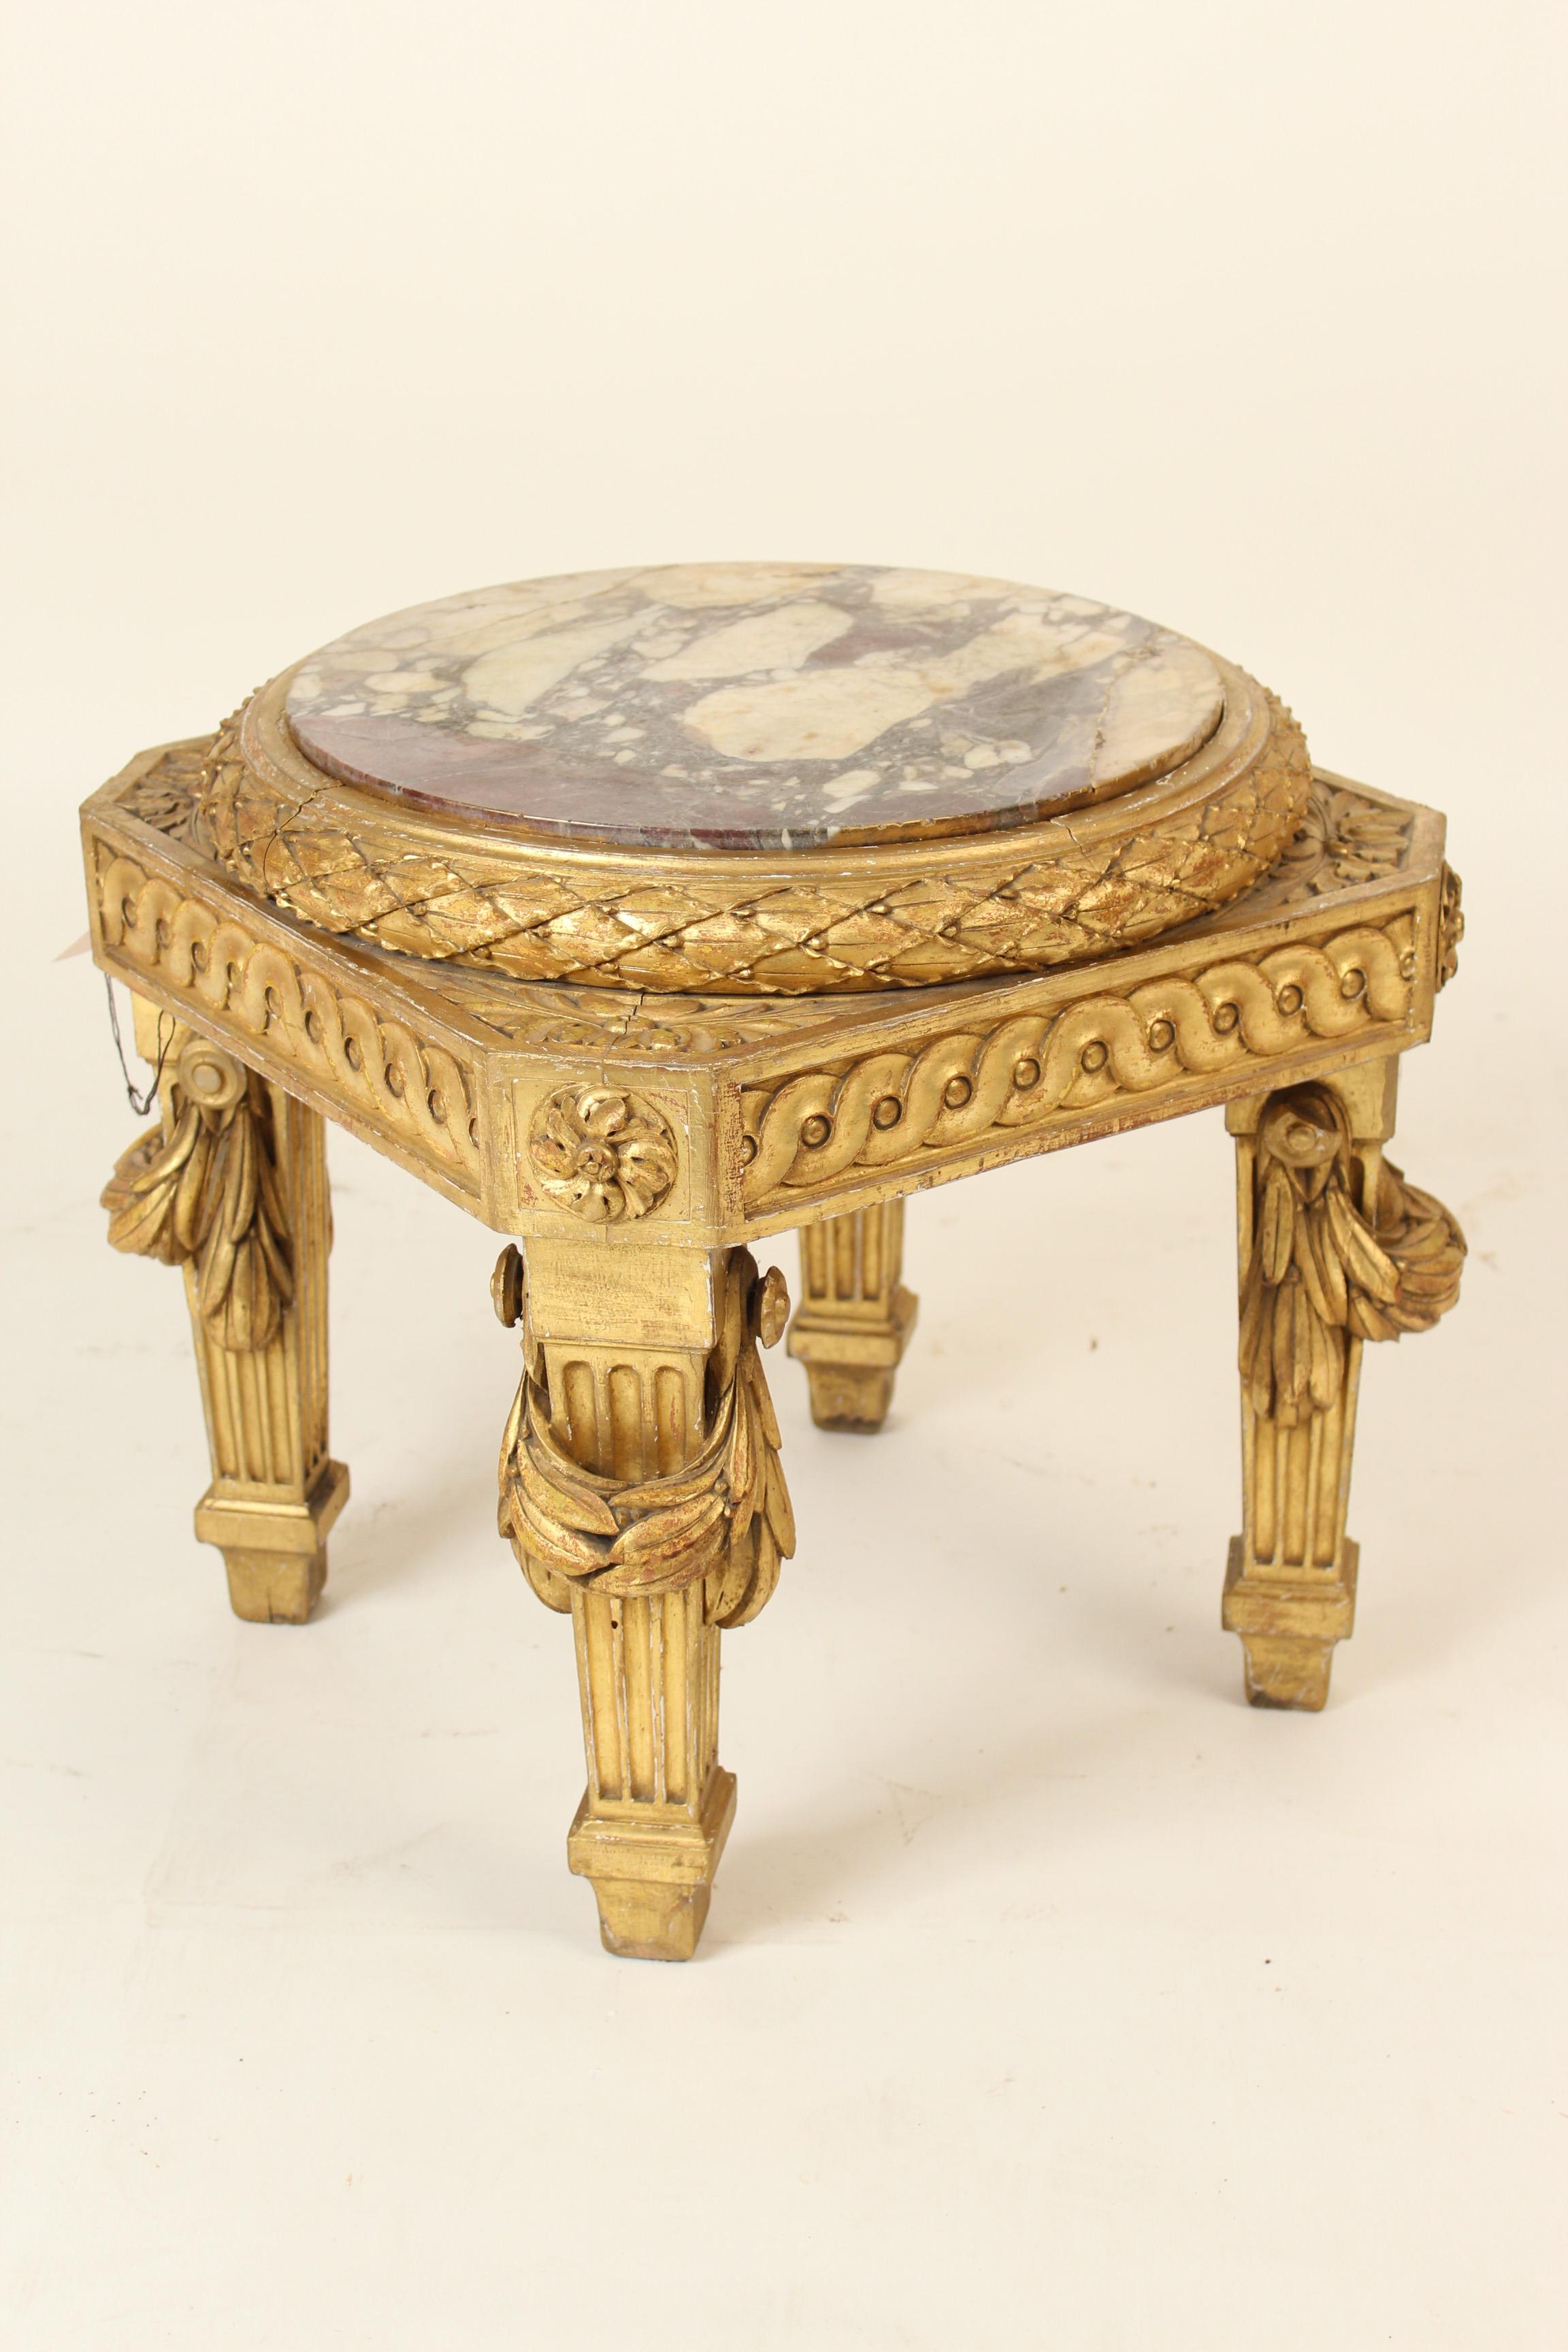 Louis XVI style gilt wood low occasional table, 19th century. With old original marble top, surrounded by a band of carved gilt wood laurel design carving, apron with carved gilt wood guilloche, resting on square tapered fluted legs with swag